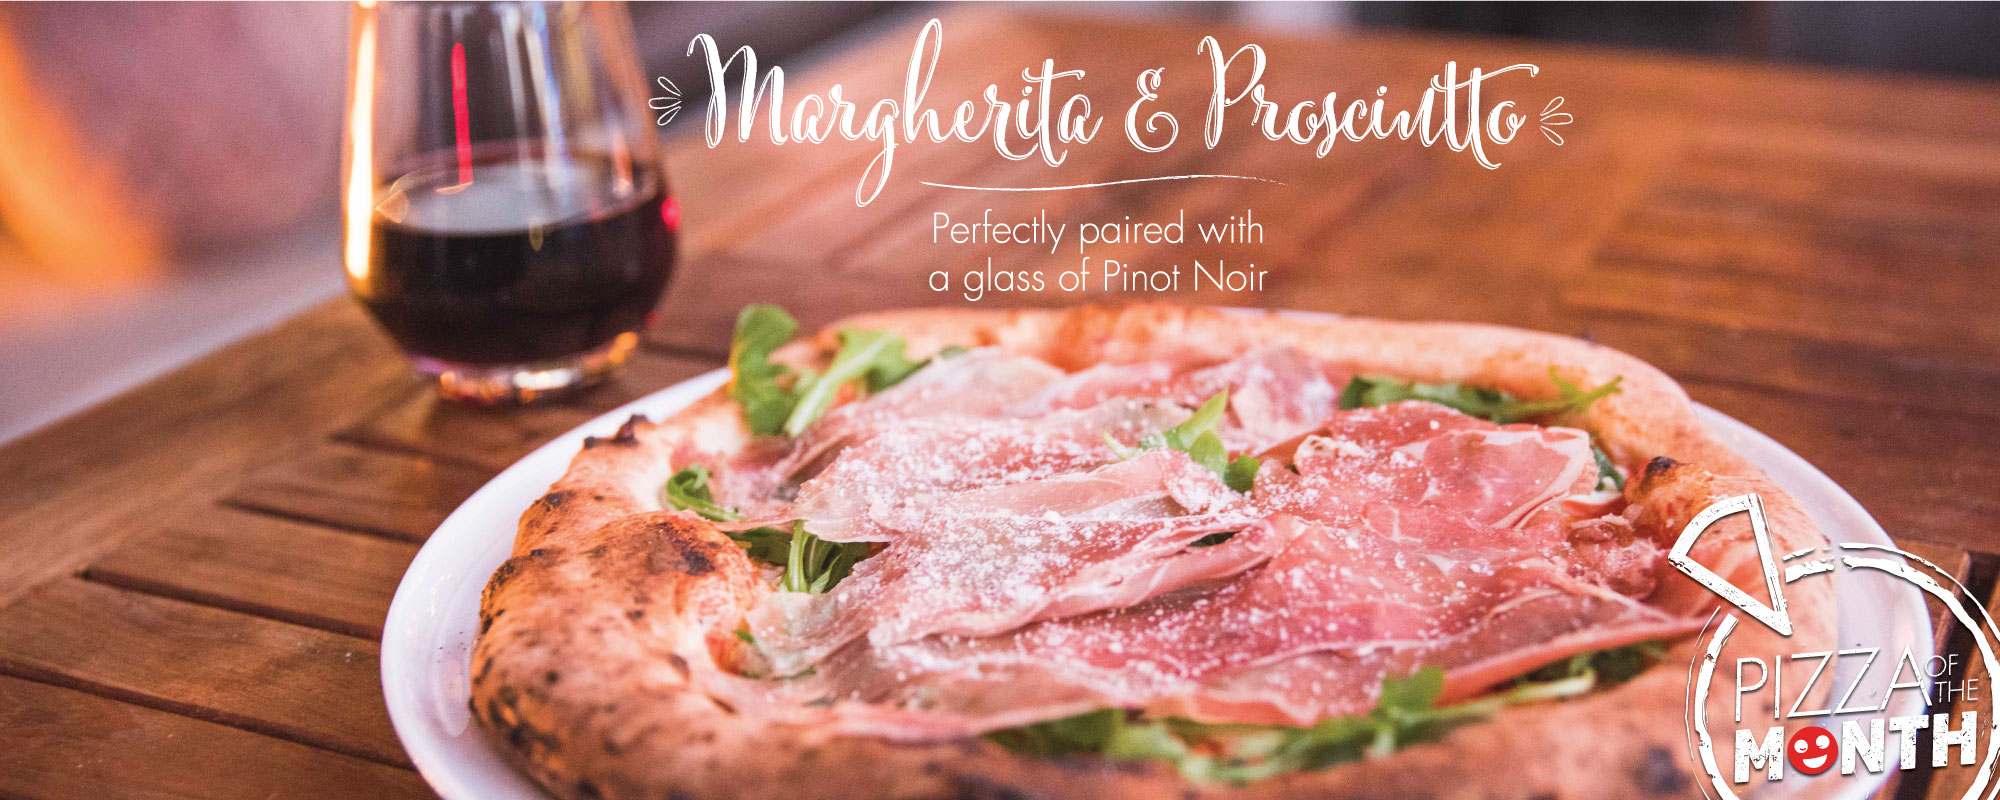 August Pizza of the Month, Margherita & Proscuitto